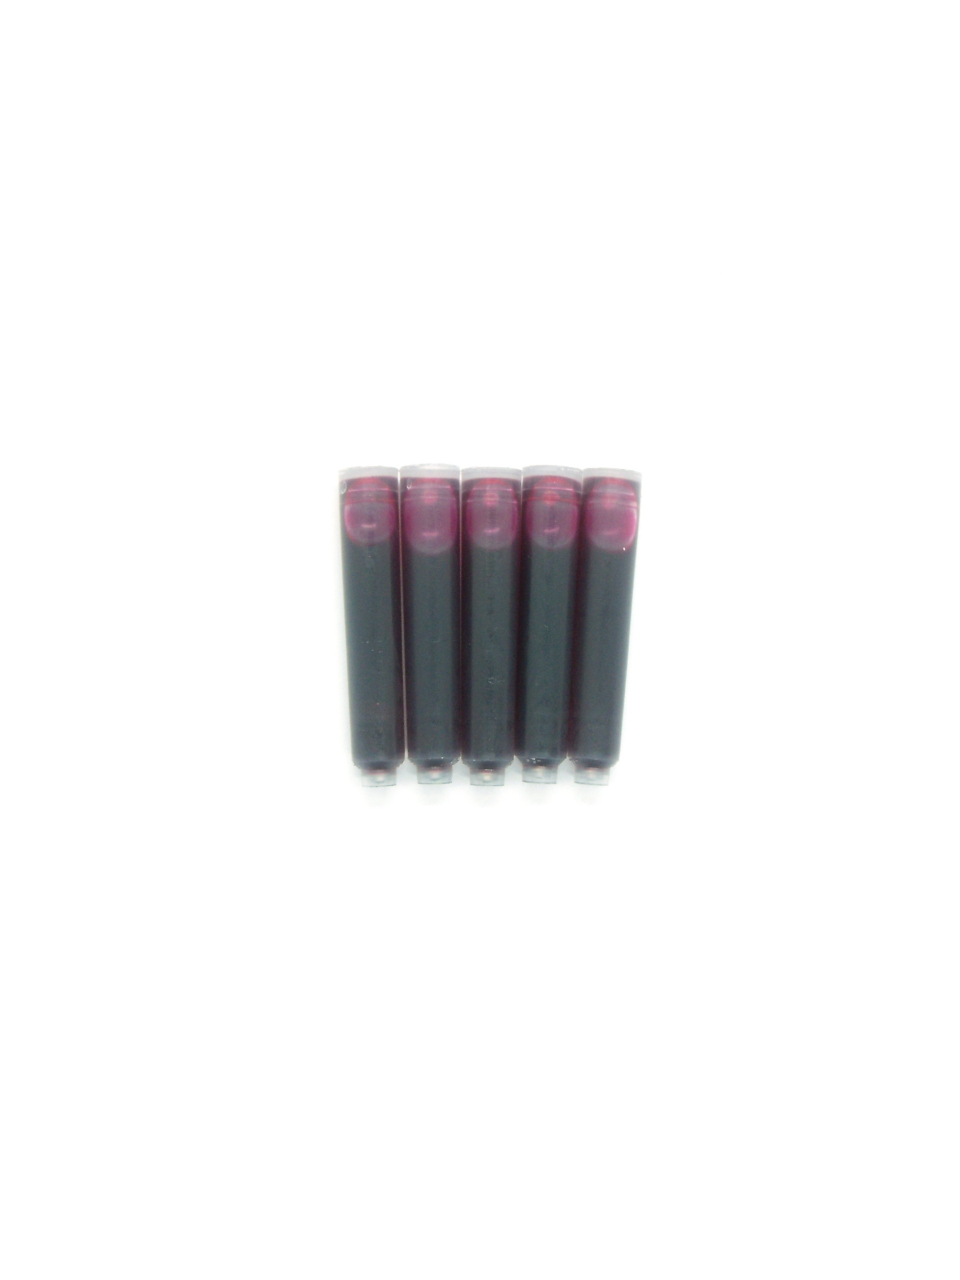 PenConverter Ink Cartridges For Conklin Fountain Pens (Pink)